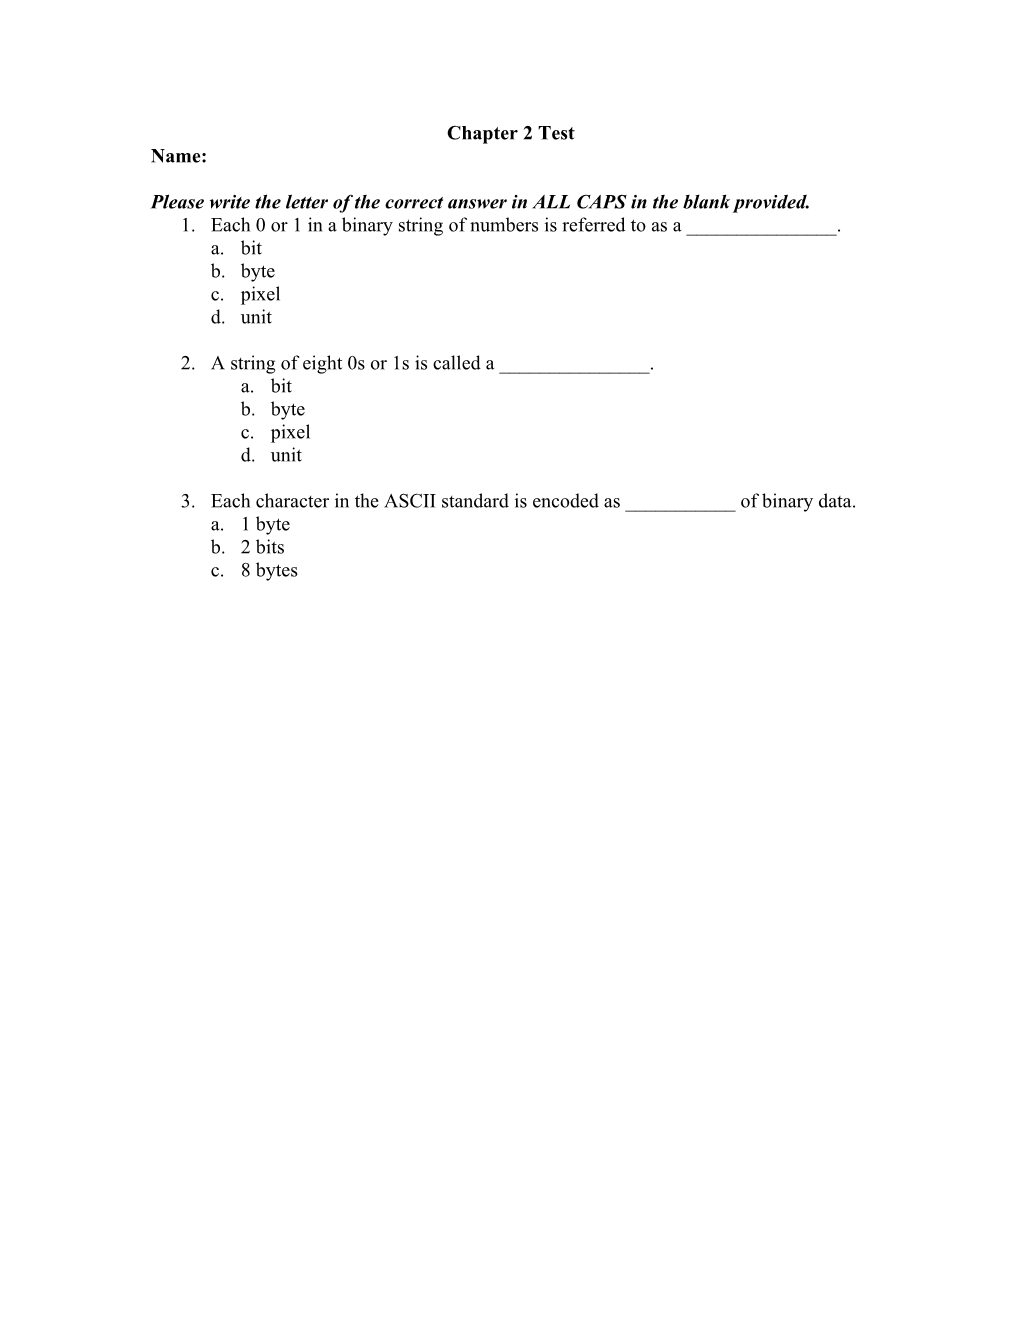 Please Write the Letter of the Correct Answer in ALL CAPS in the Blank Provided